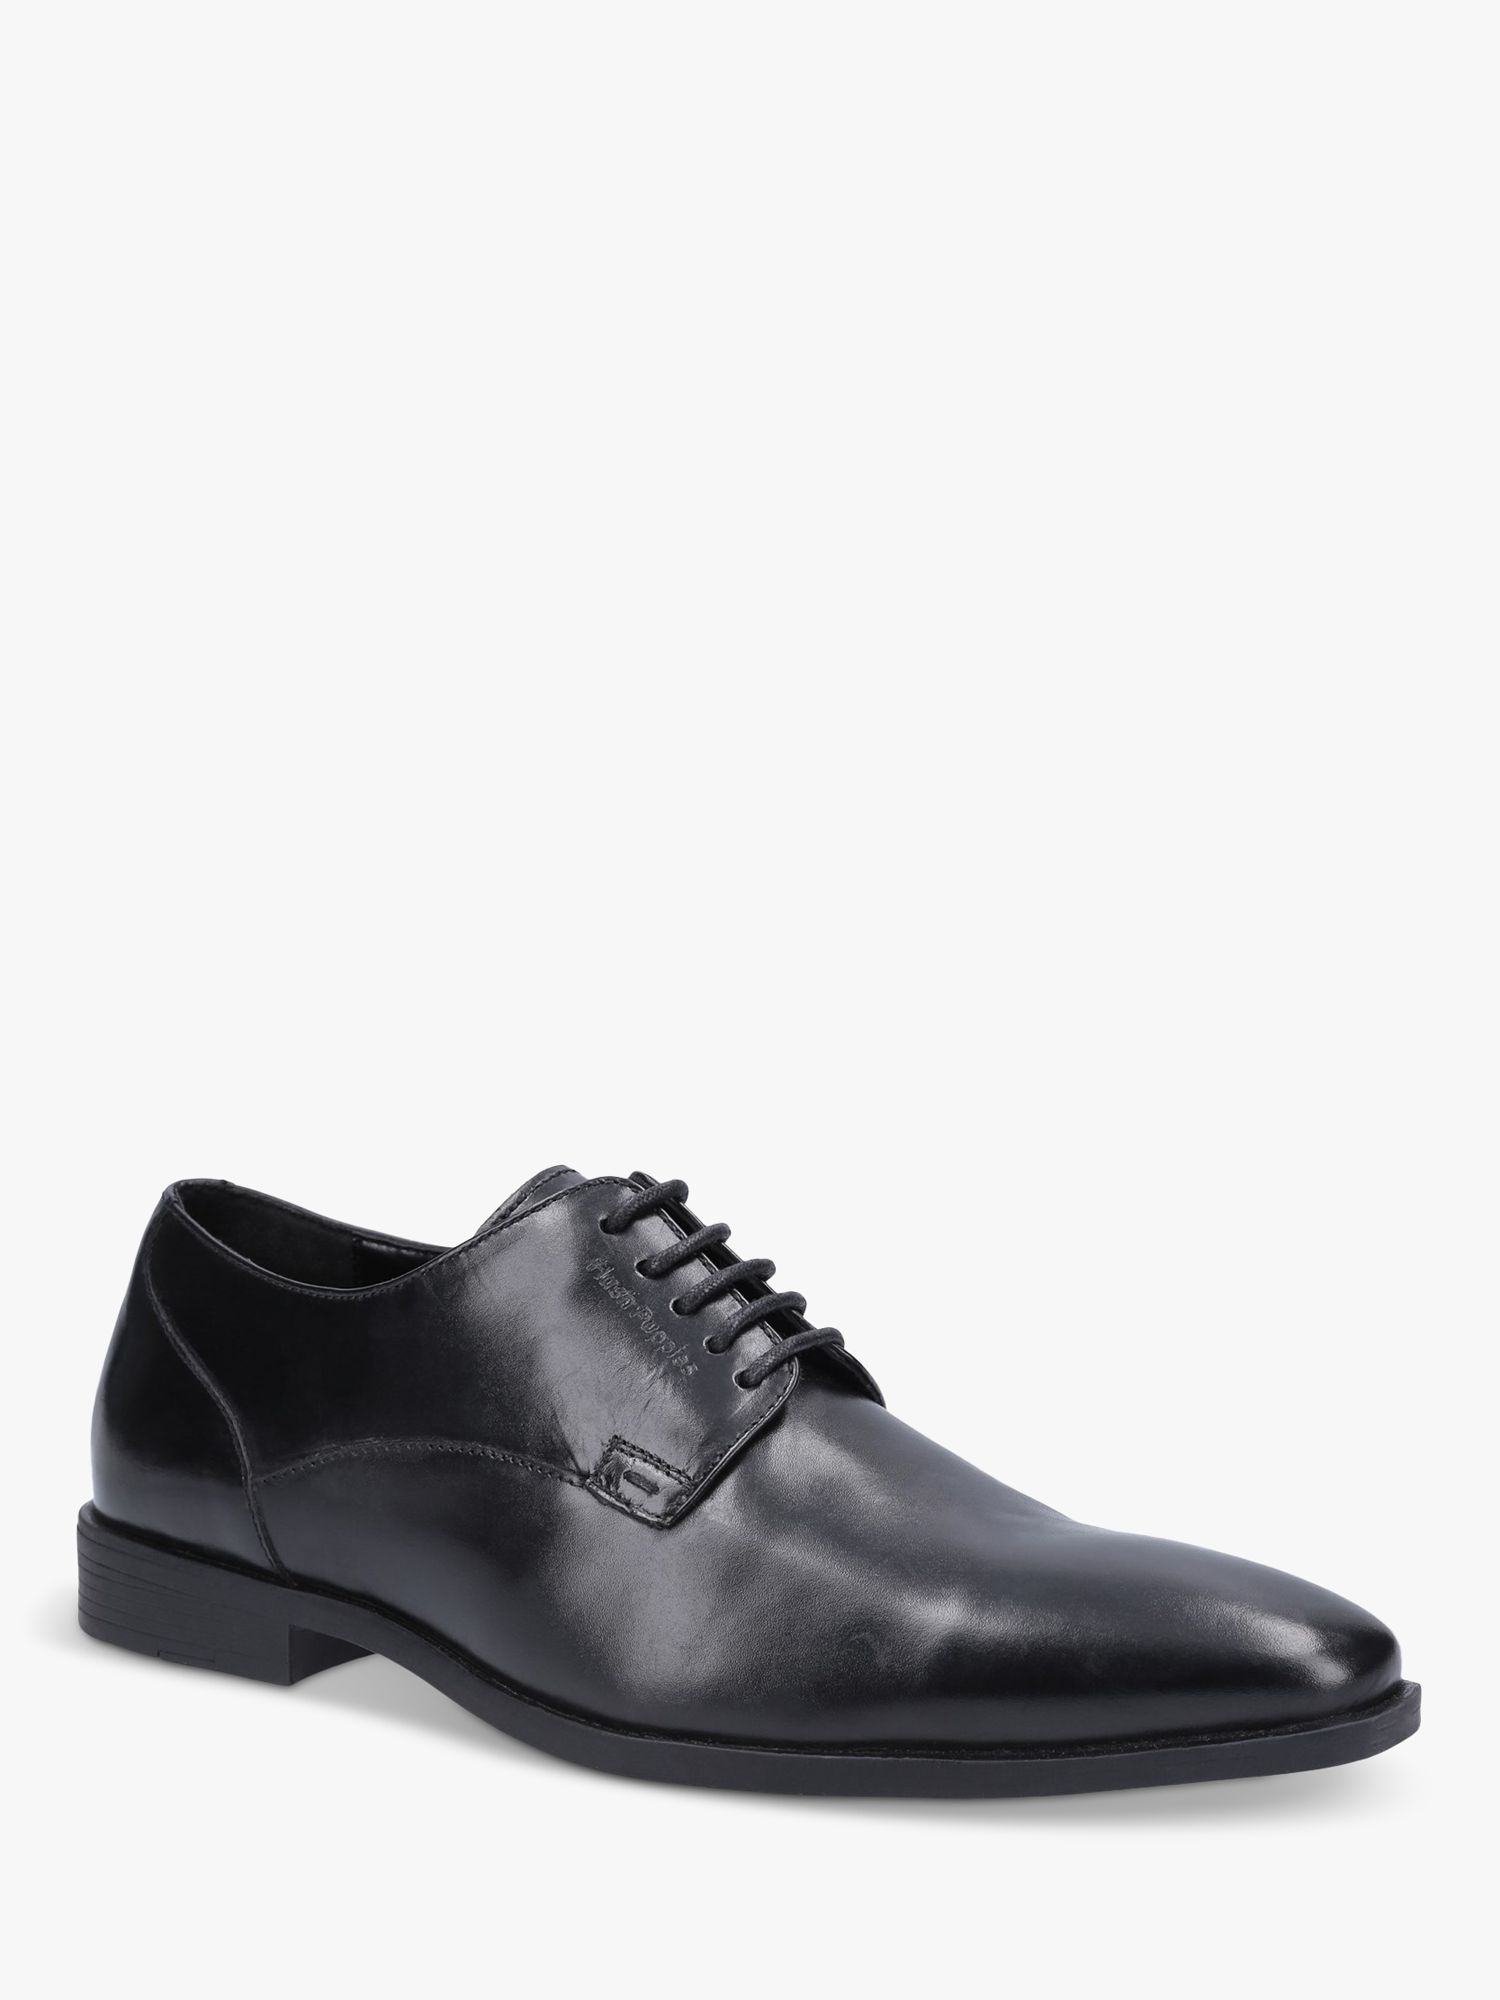 Hush Puppies Ezra Leather Lace Up Shoes, Black, 9